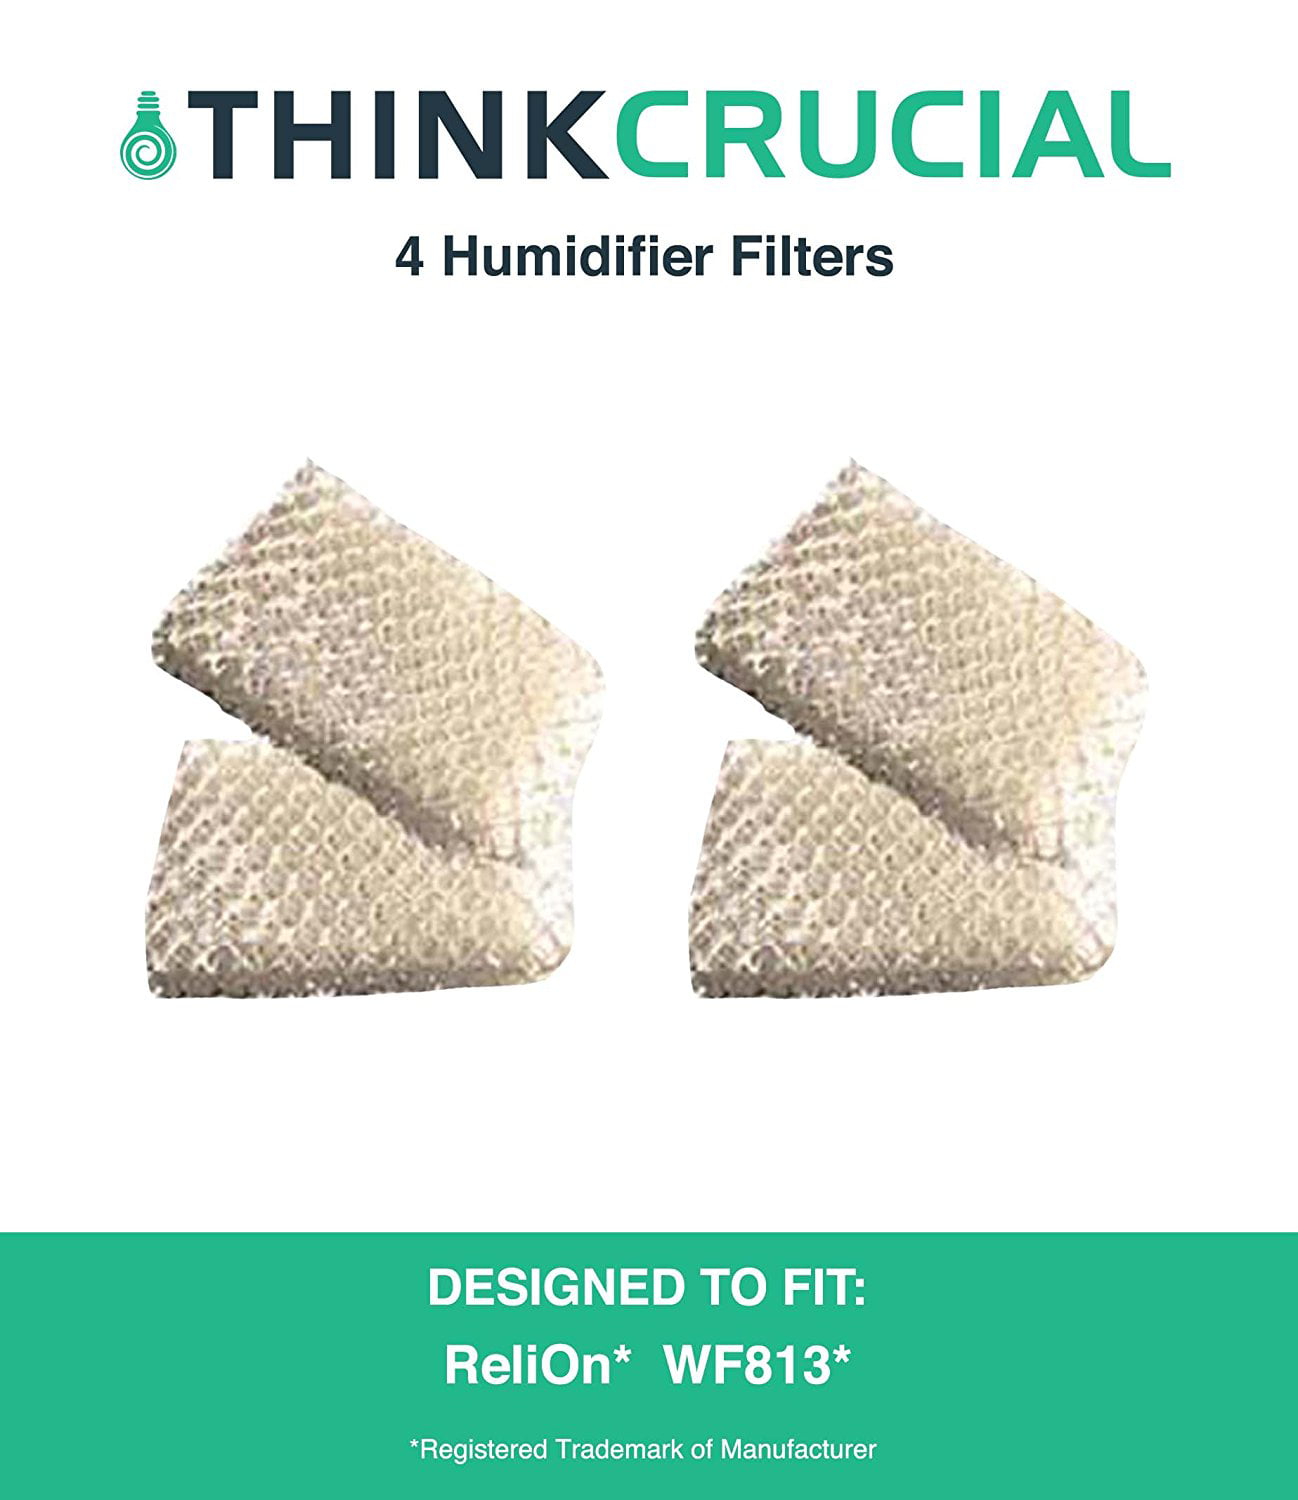 Think Crucial Humidifier Filters Designed To Fit Relion Wf813 Humidifier 6Pk 